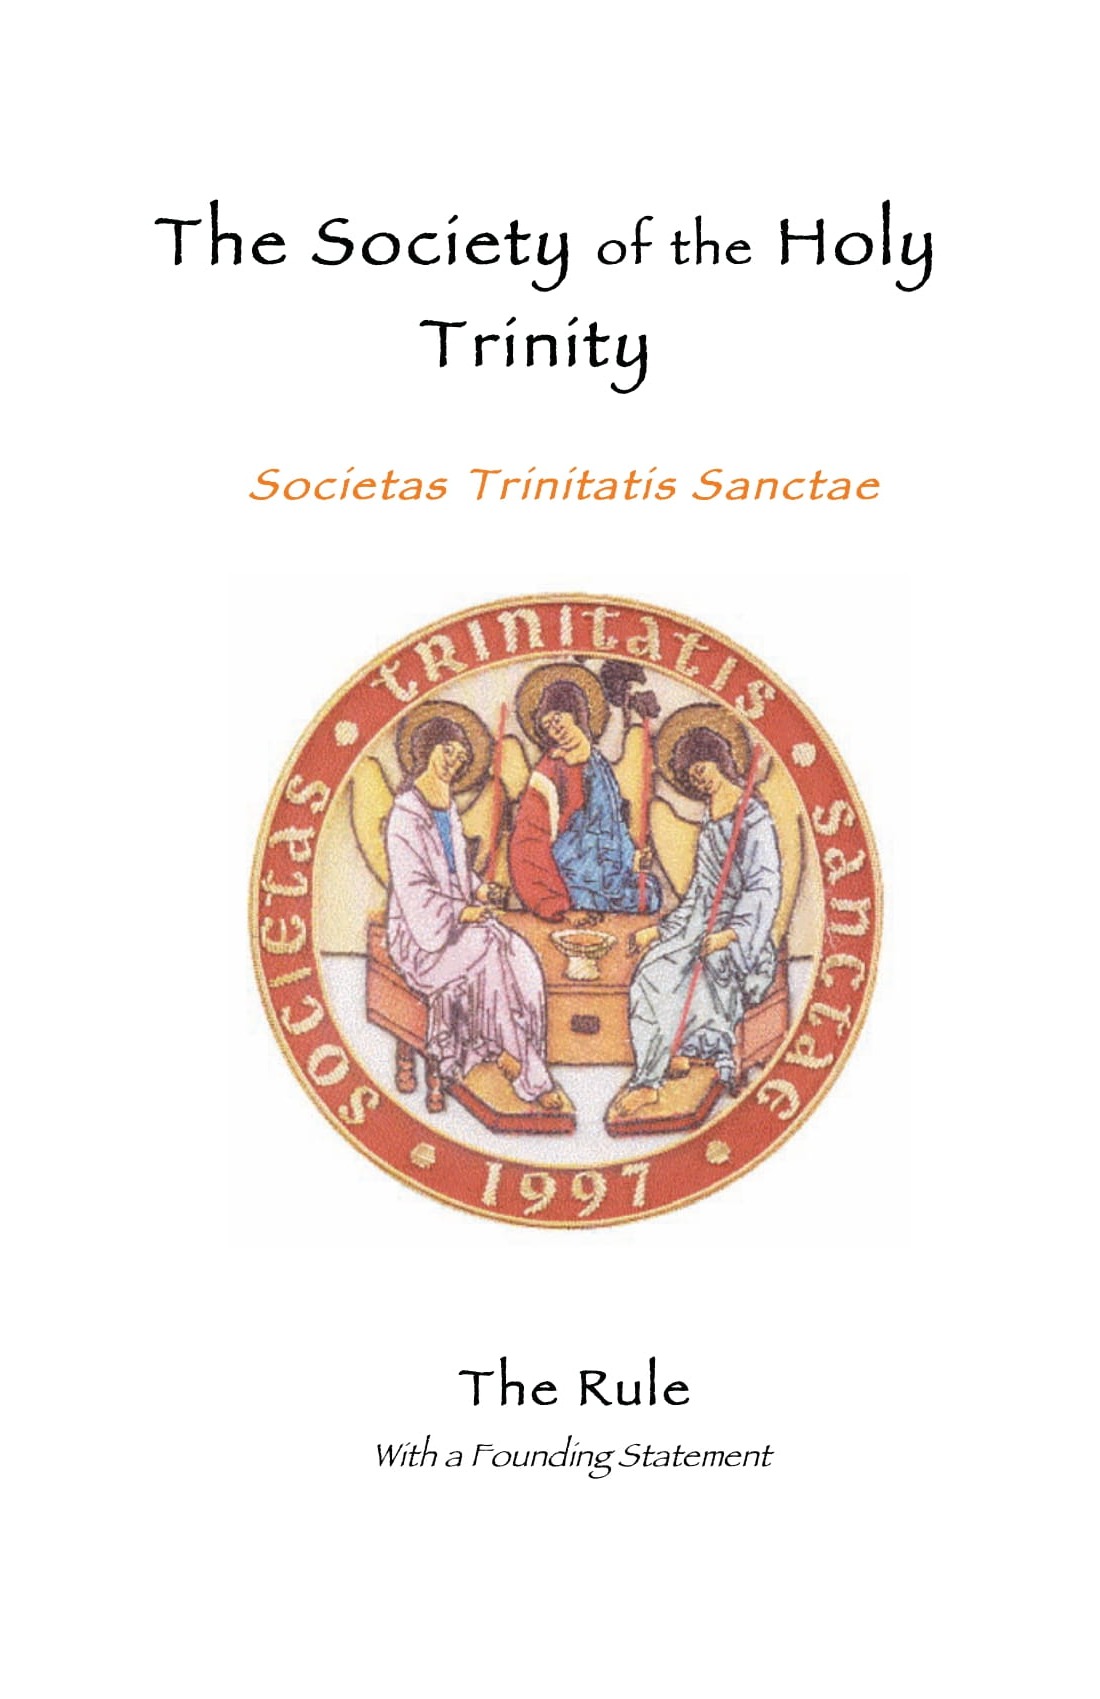 The Rule of The Society of the Holy Trinity